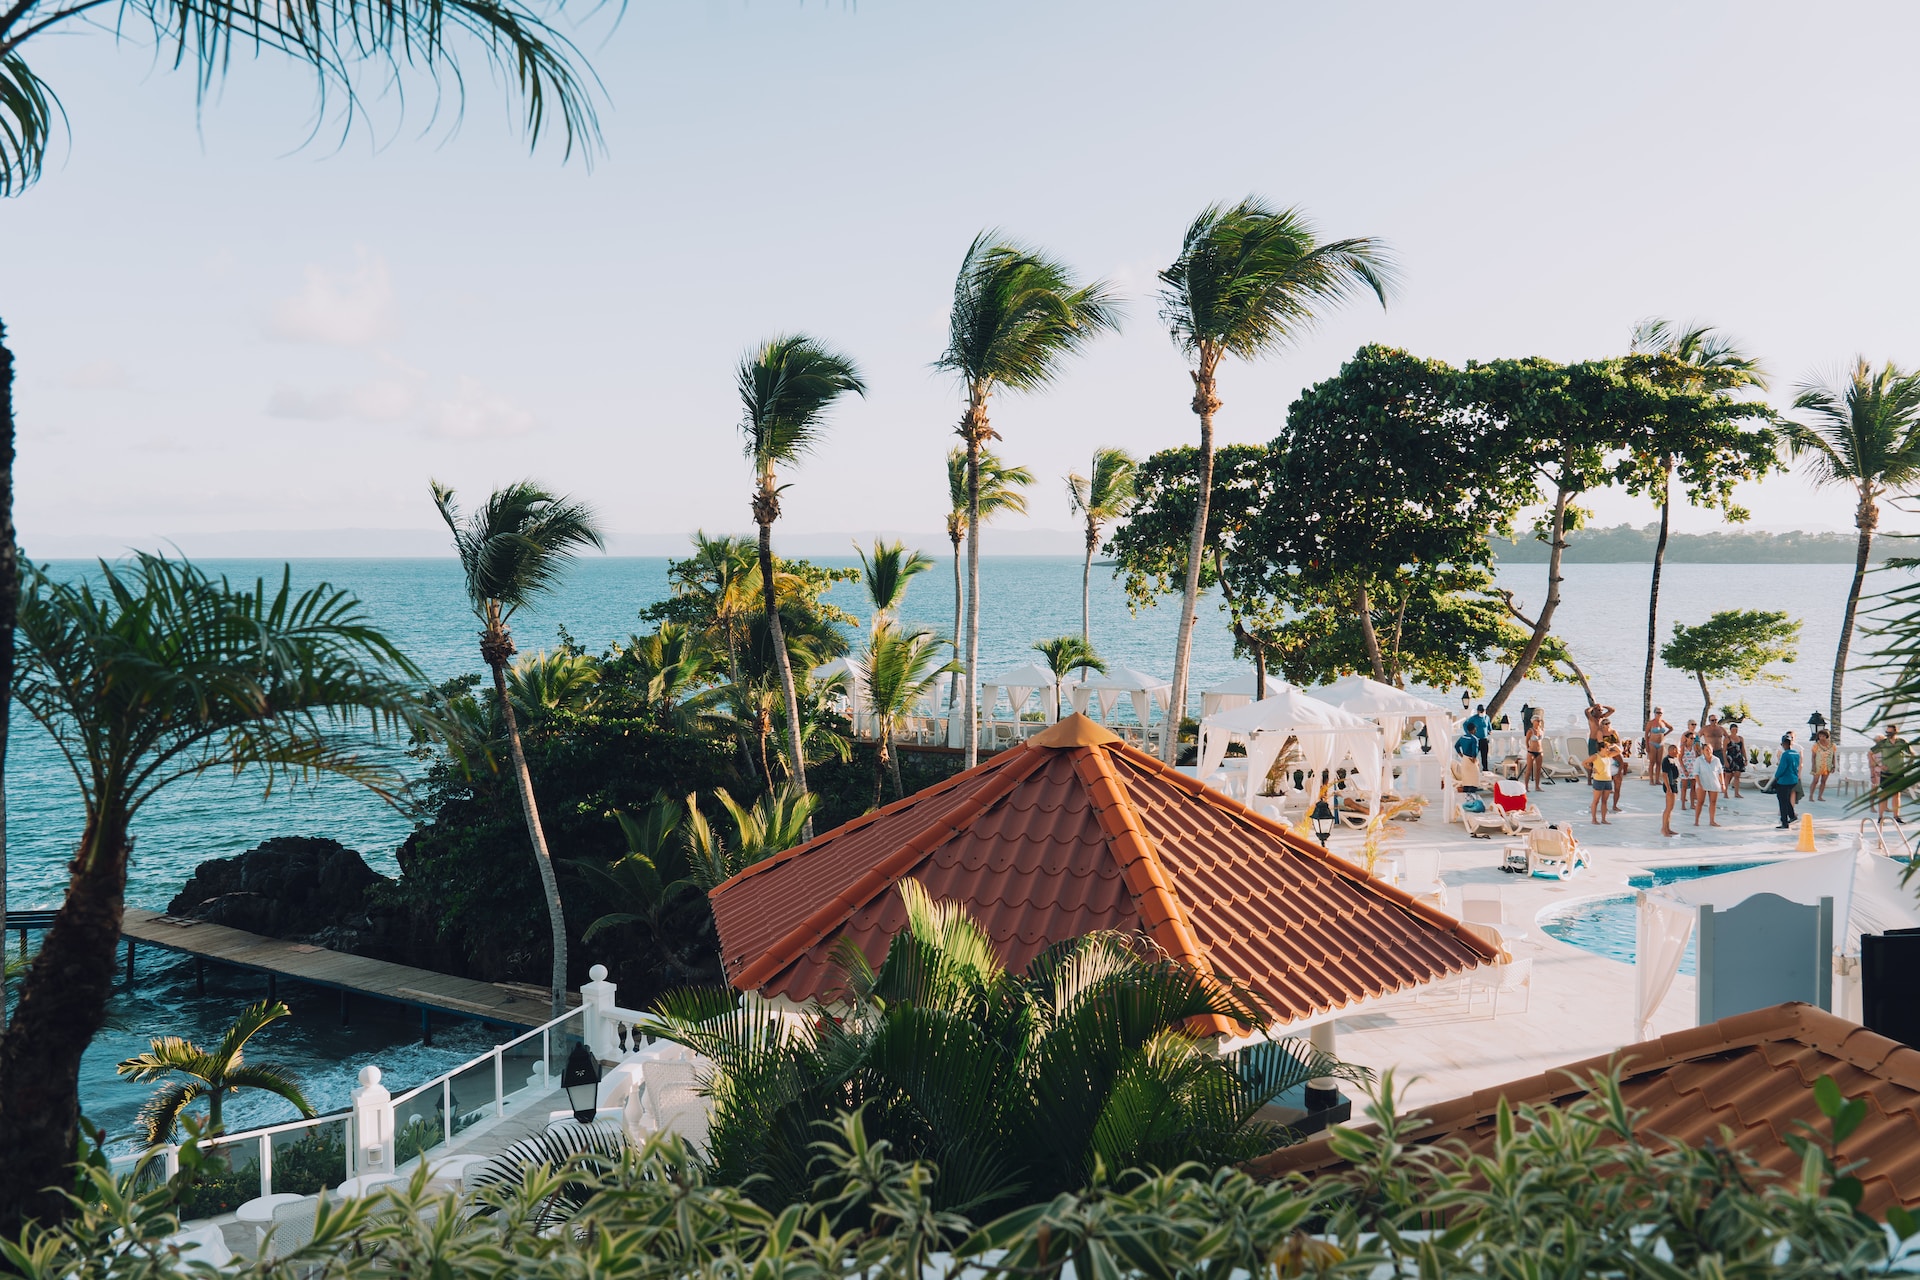 Credit card, payment and expense companies have seen a massive jump in transactions for the first quarter. Pictured is the Dominican Republic. Source: Unsplash